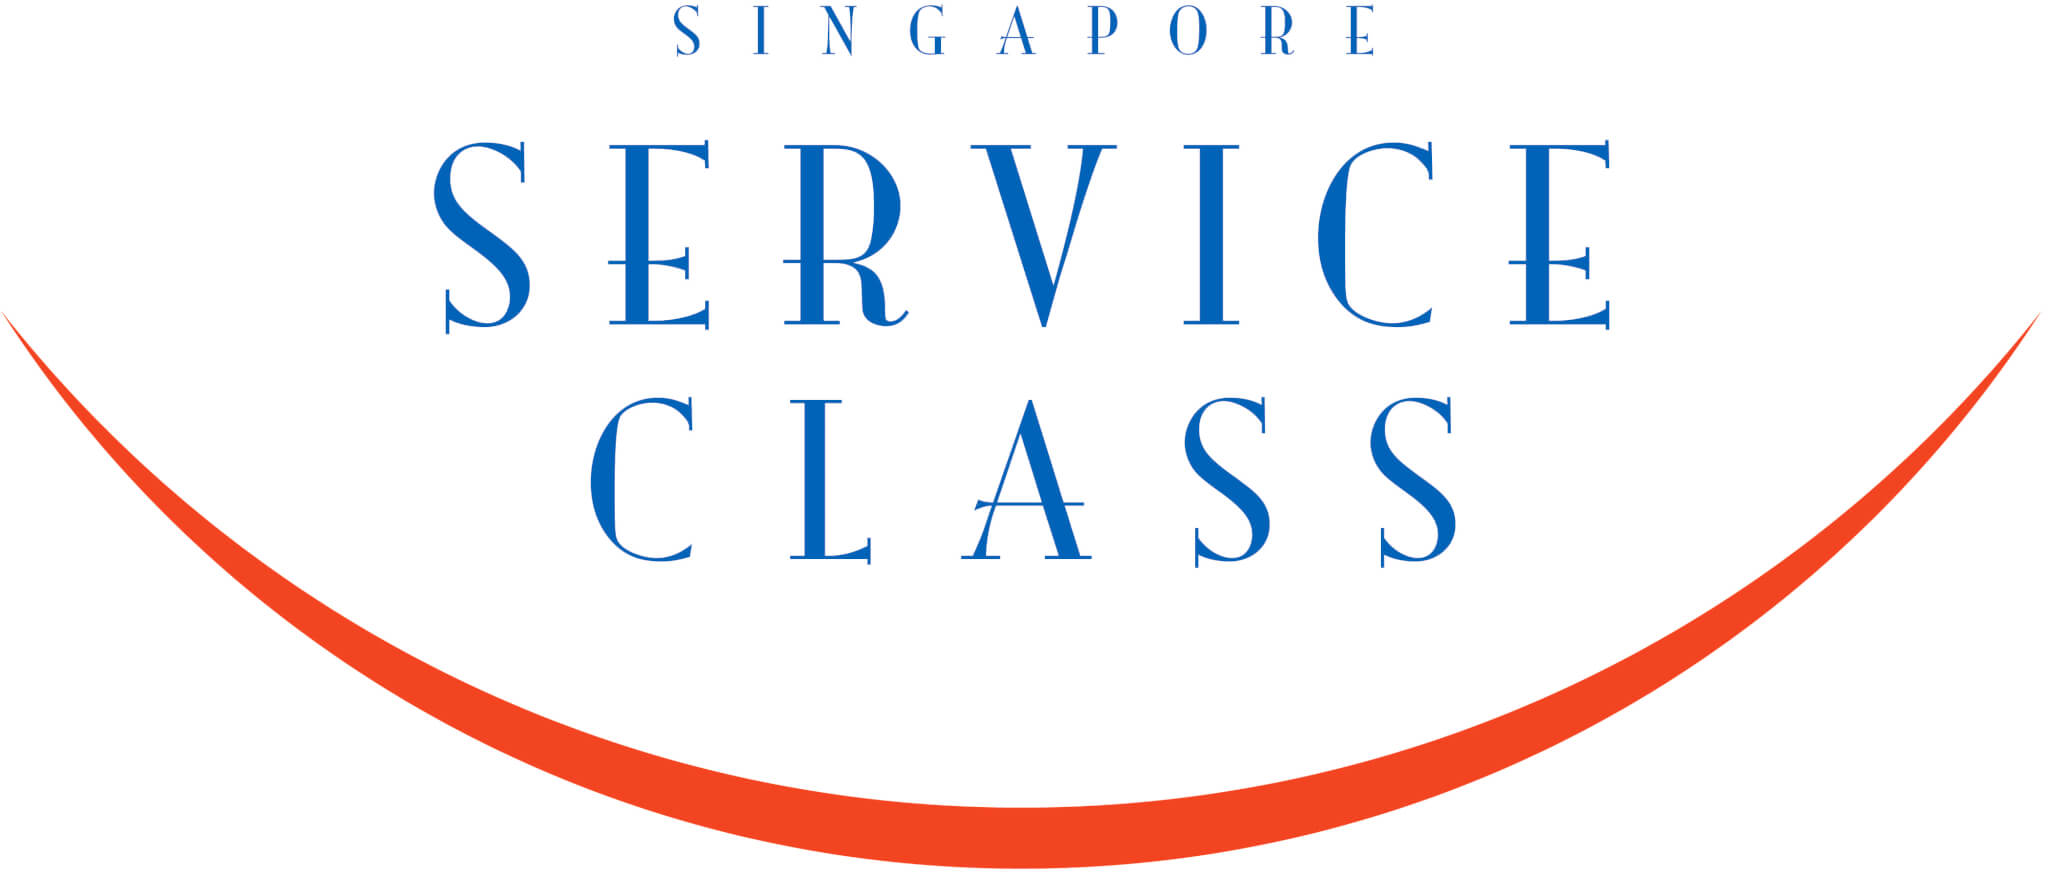 Specialist Dental Group is awarded Singapore Service Class